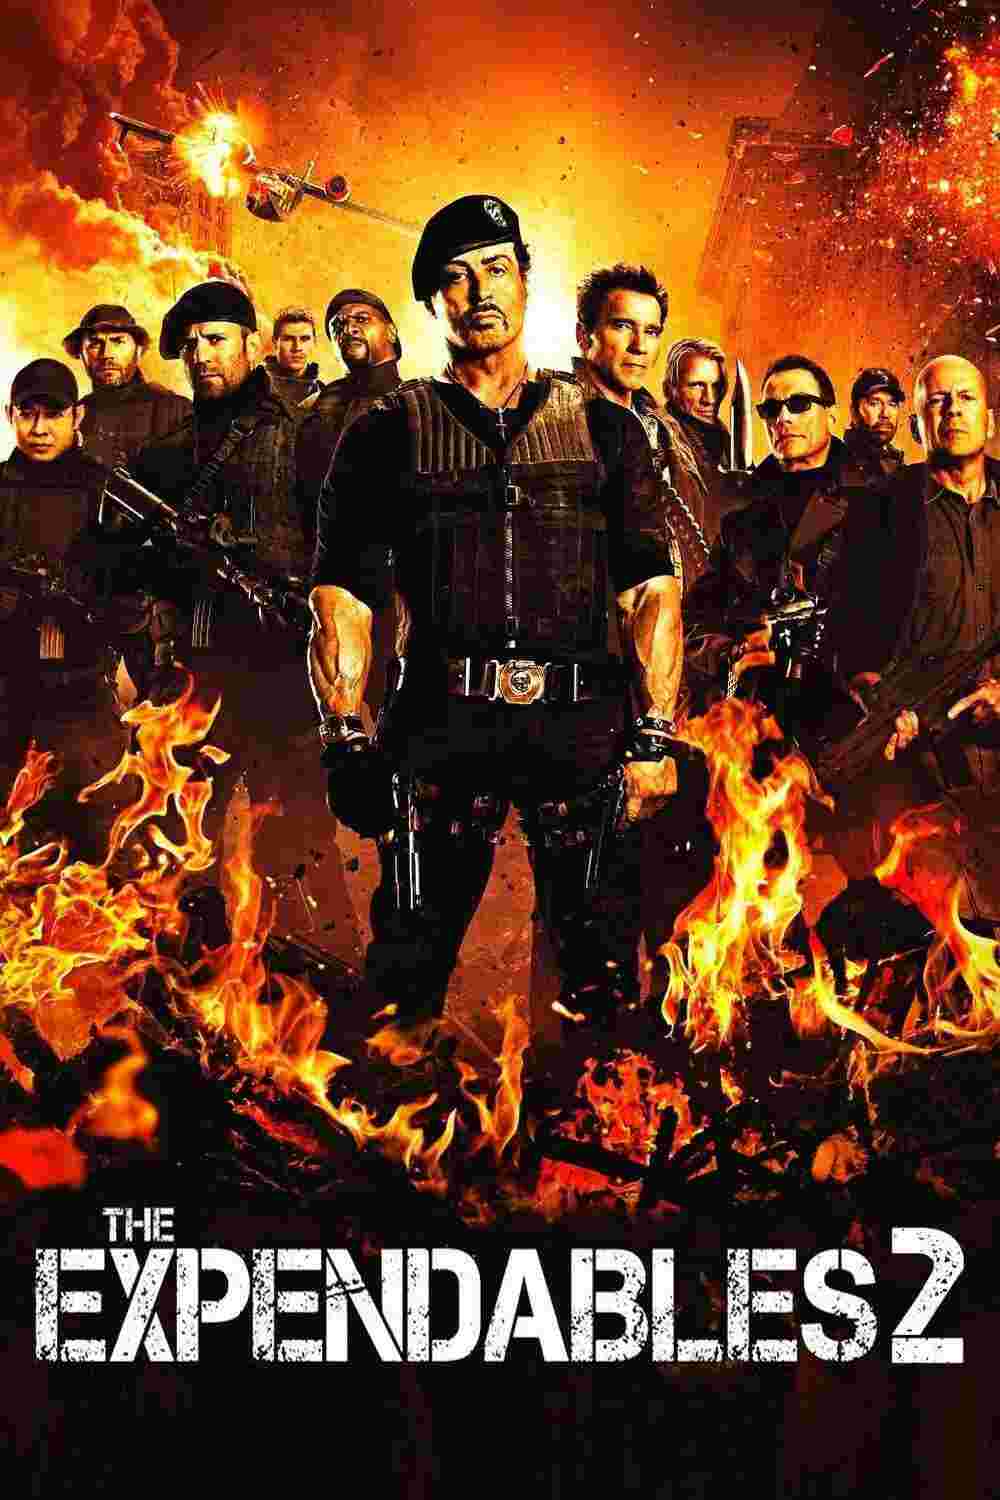 The Expendables 2 (2012) Sylvester Stallone